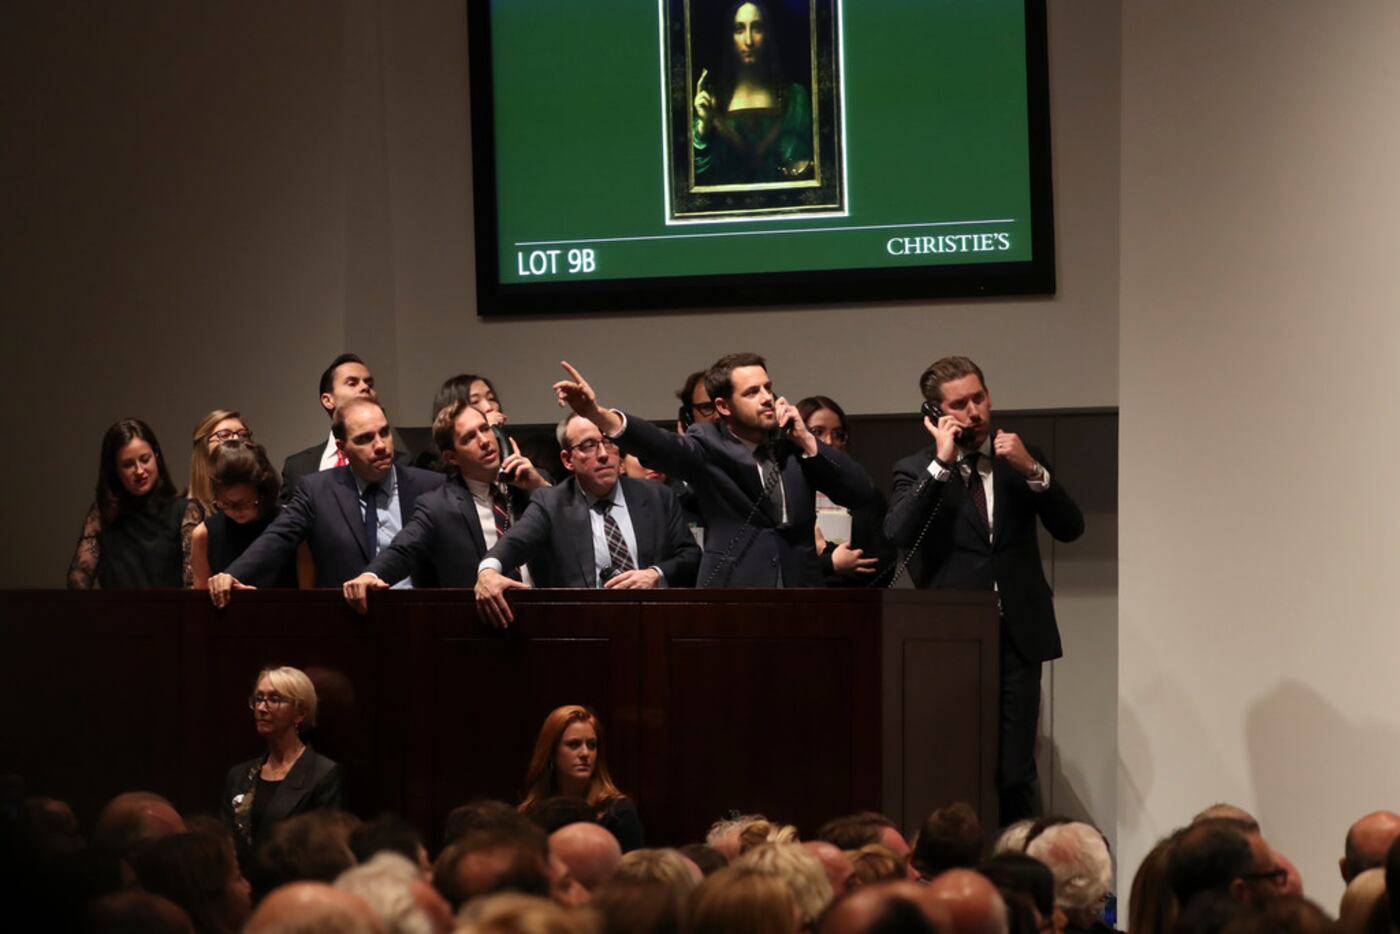 Bidding on the painting during the auction was intense. (Michelle V. Agins/The New York Times)